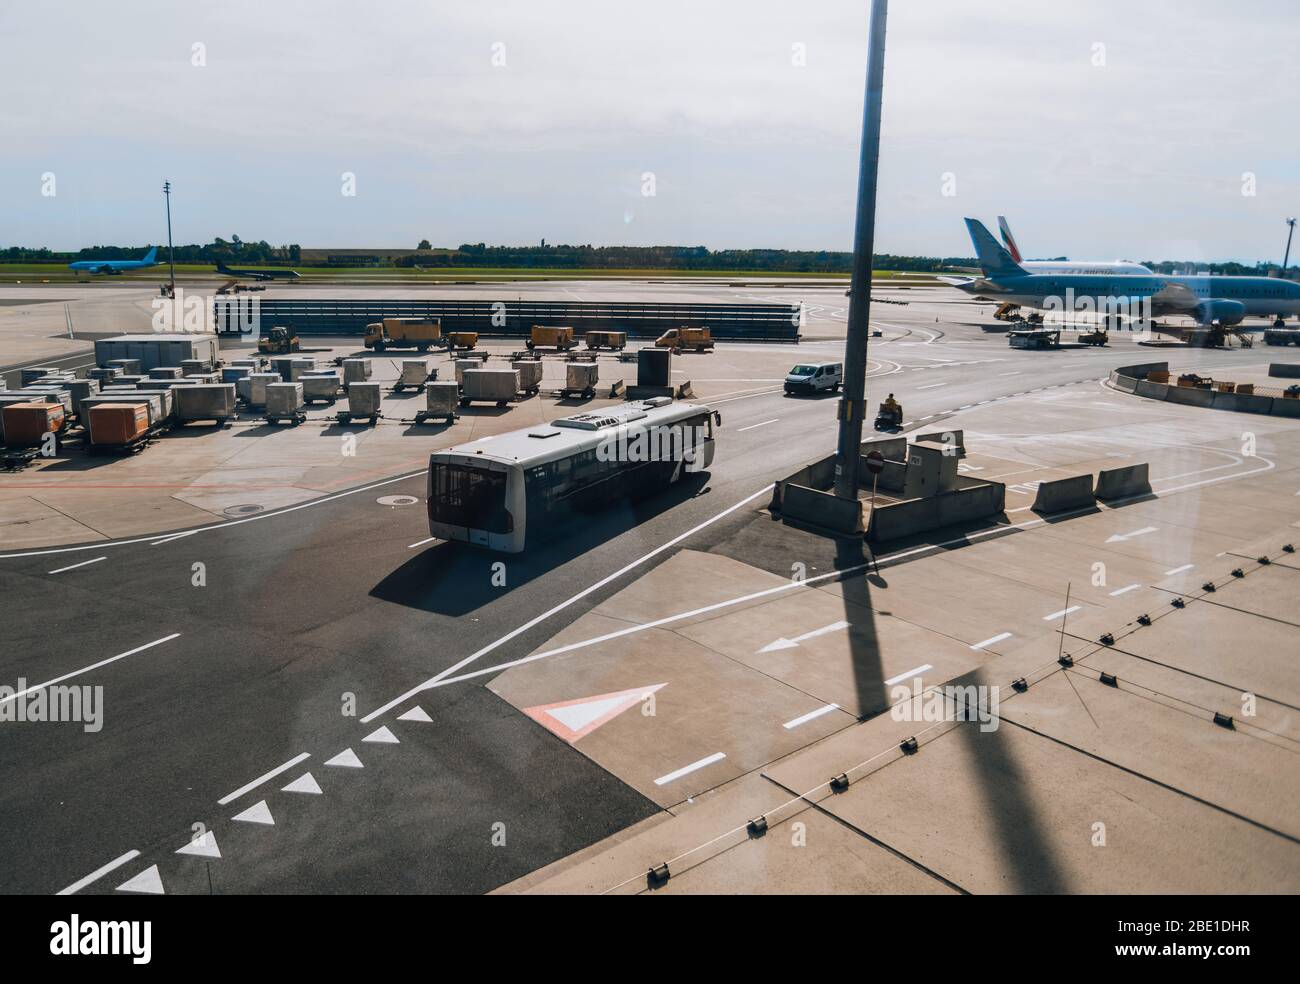 Apron area at the aerodrome with an airport bus, storage containers and  ground support vehicles Stock Photo - Alamy